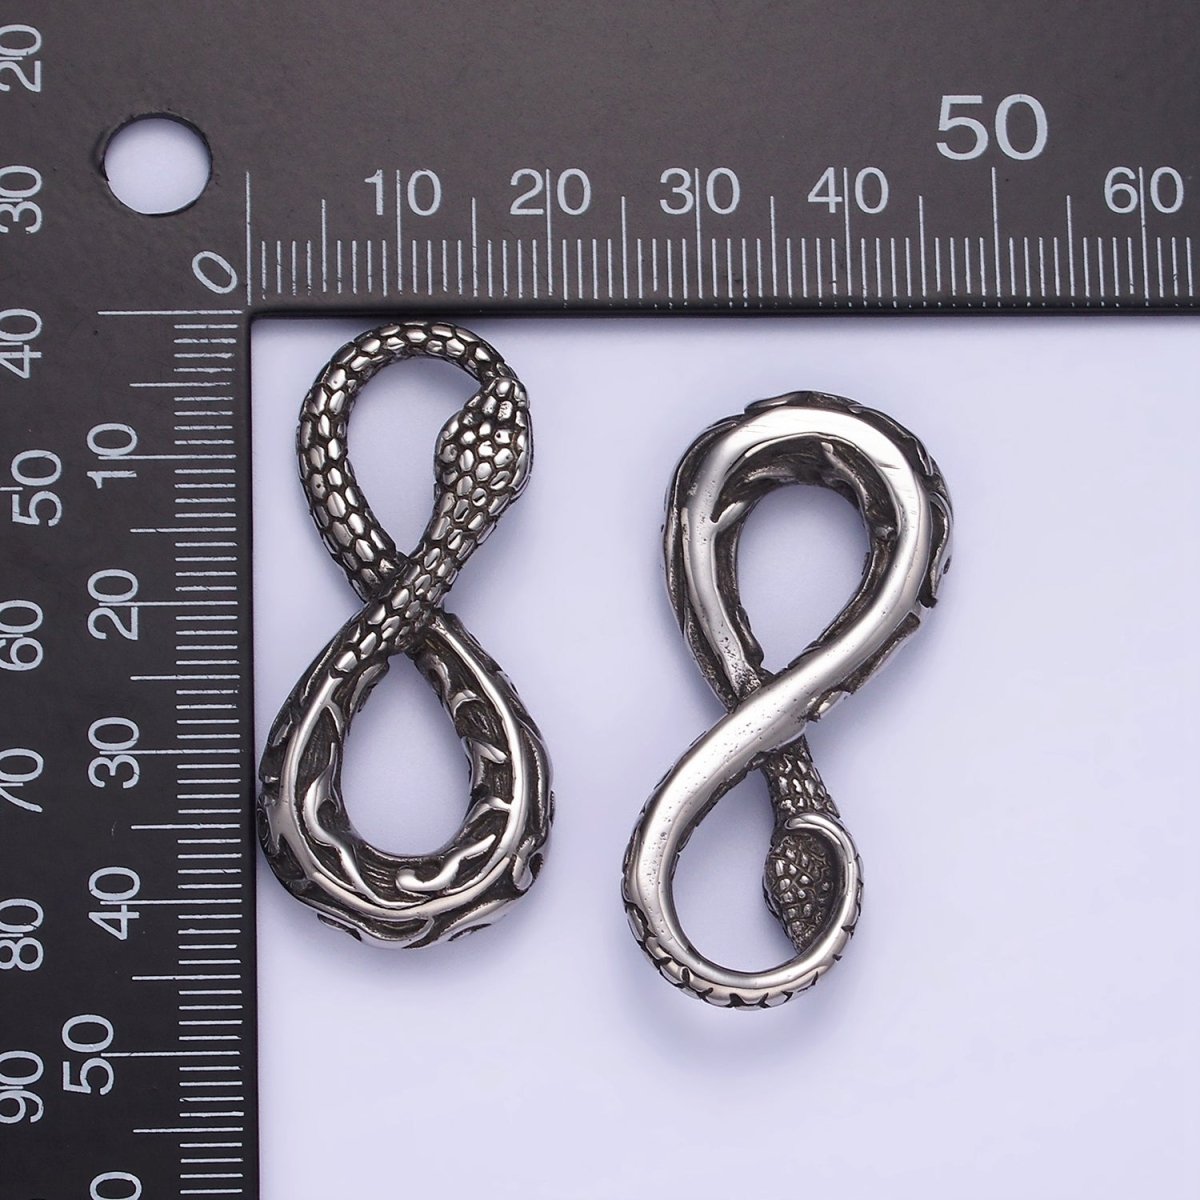 Stainless Steel 43mm Artisan Scaled Snake Serpent Animal Infinity Charm | P946 - DLUXCA